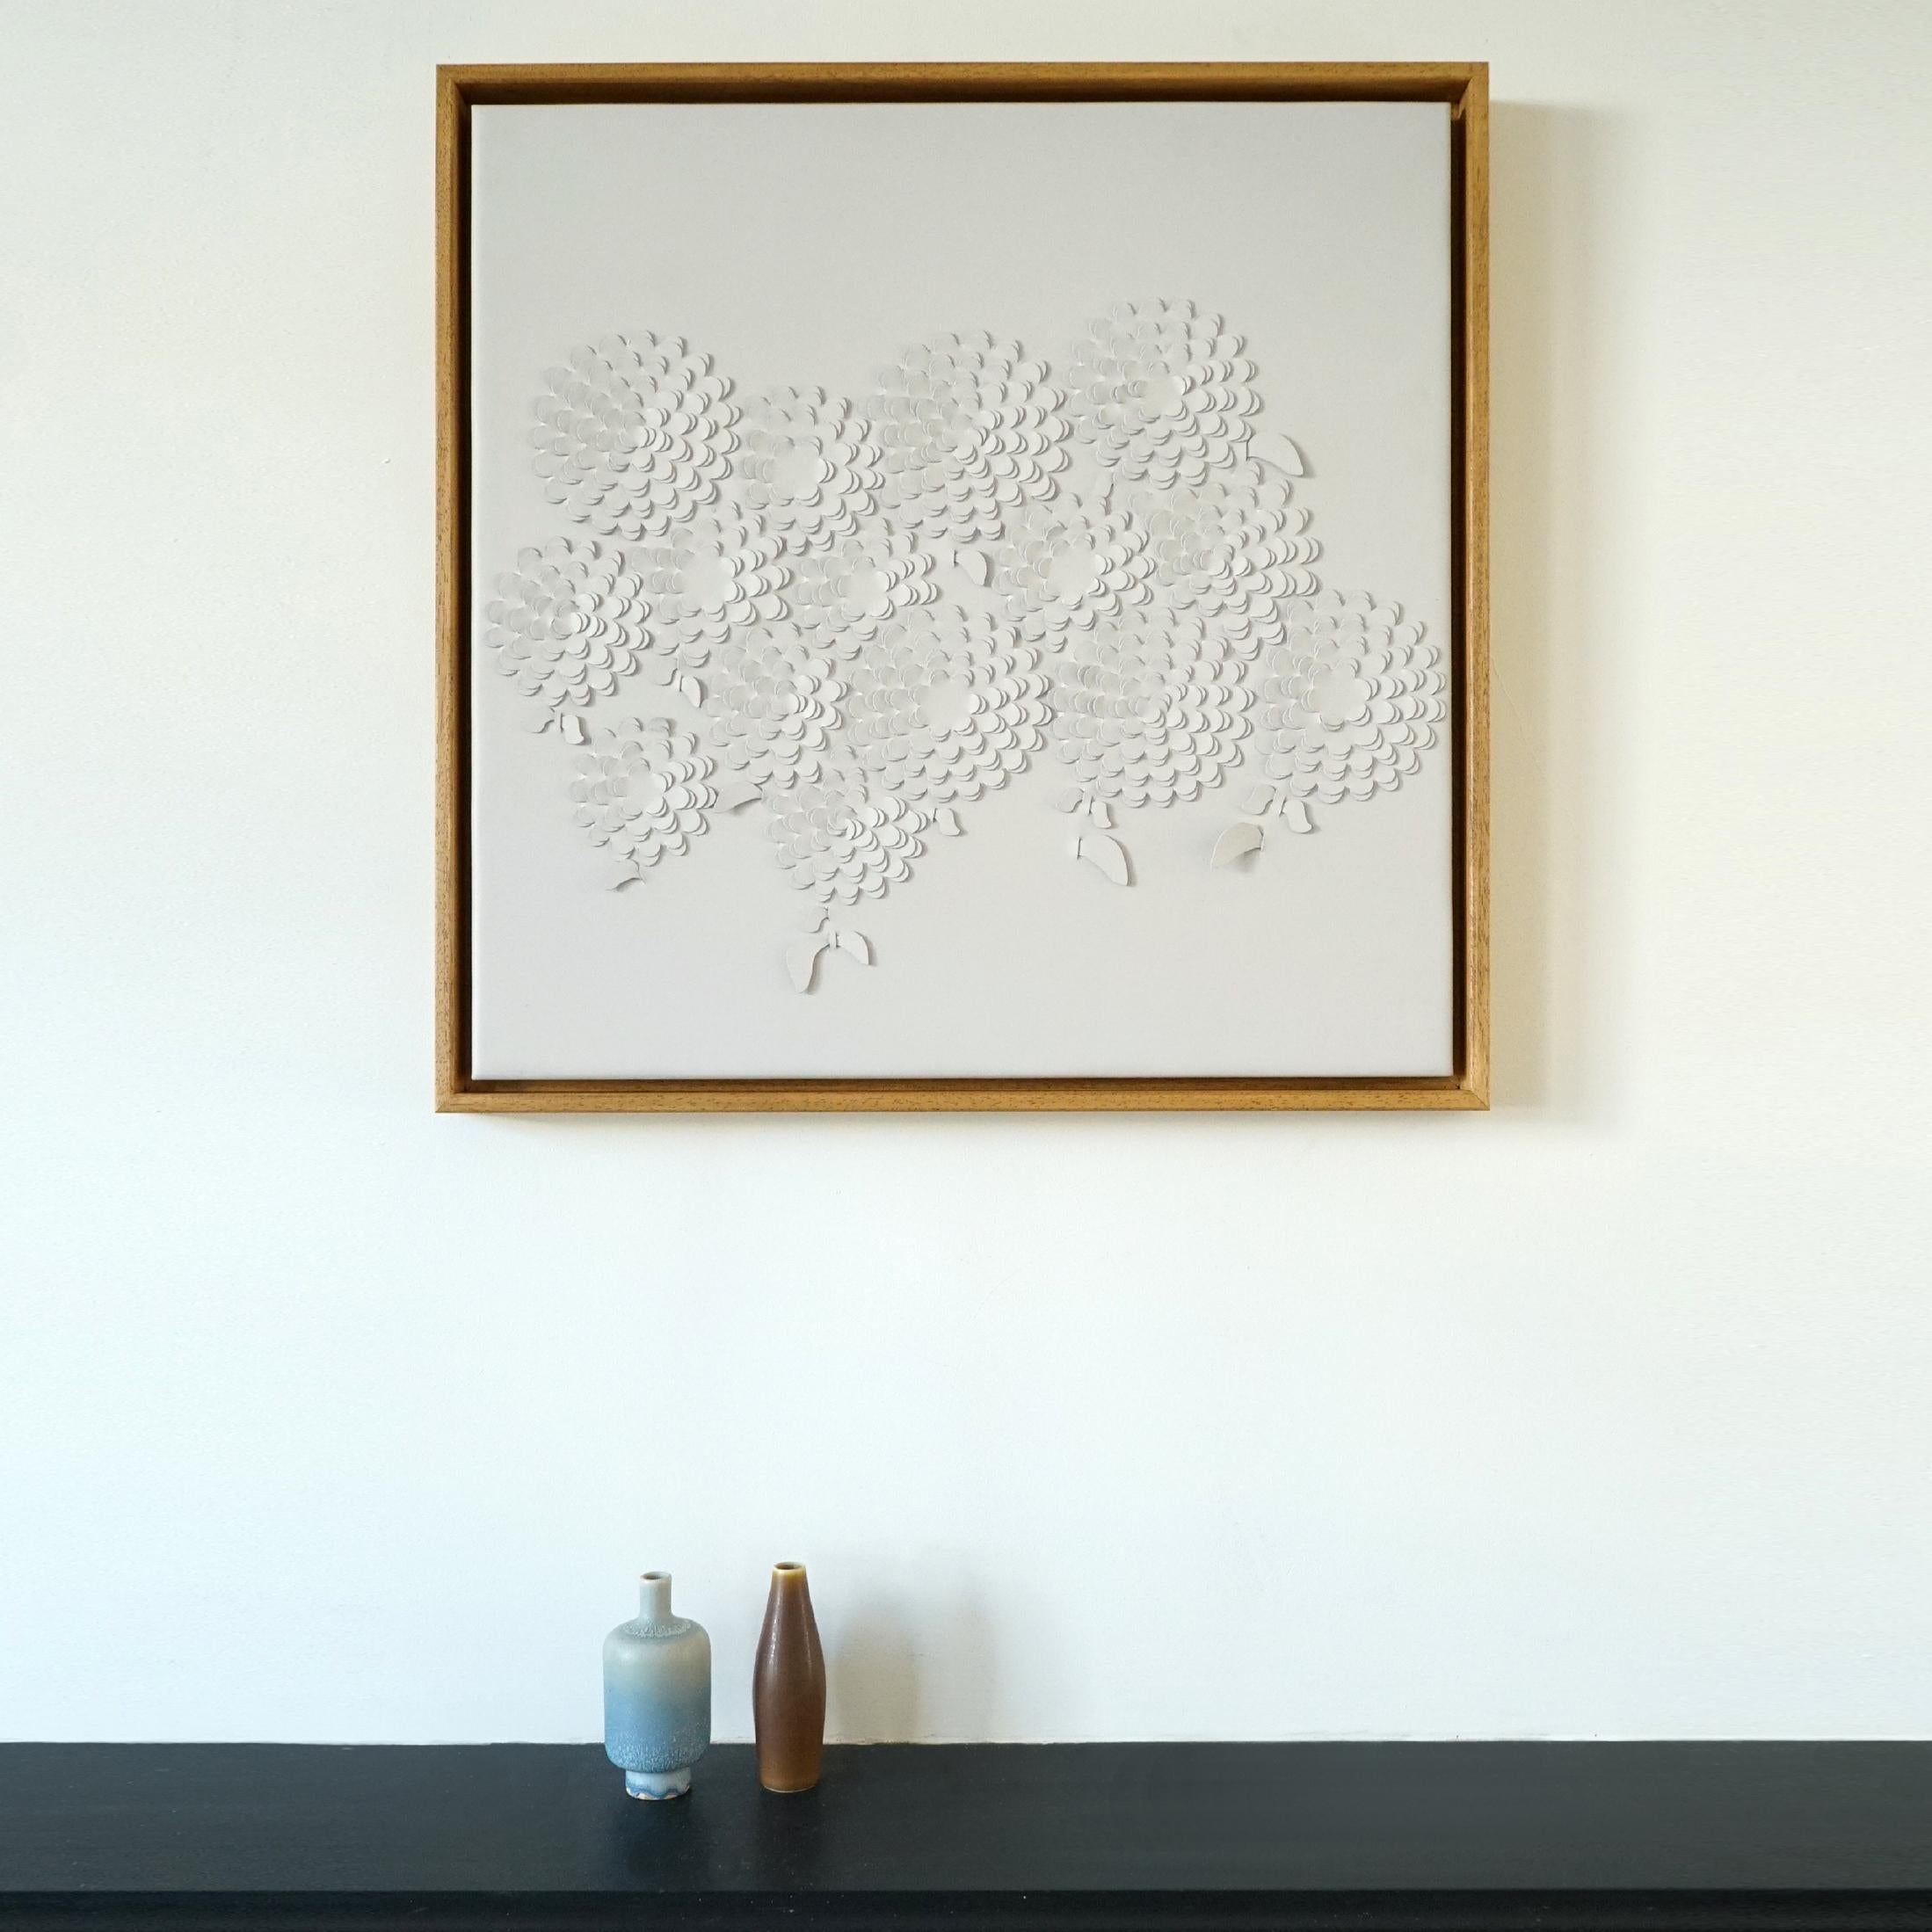 Chrysanthemum:

A piece of 3D sculptural wall art designed and made from two layers of cream leather, woven together by Louise Heighes.
Measurements are 25.5 x 25.5 inches or 65 x 65 cm

This piece is inspired by the big mass of repeating petals of